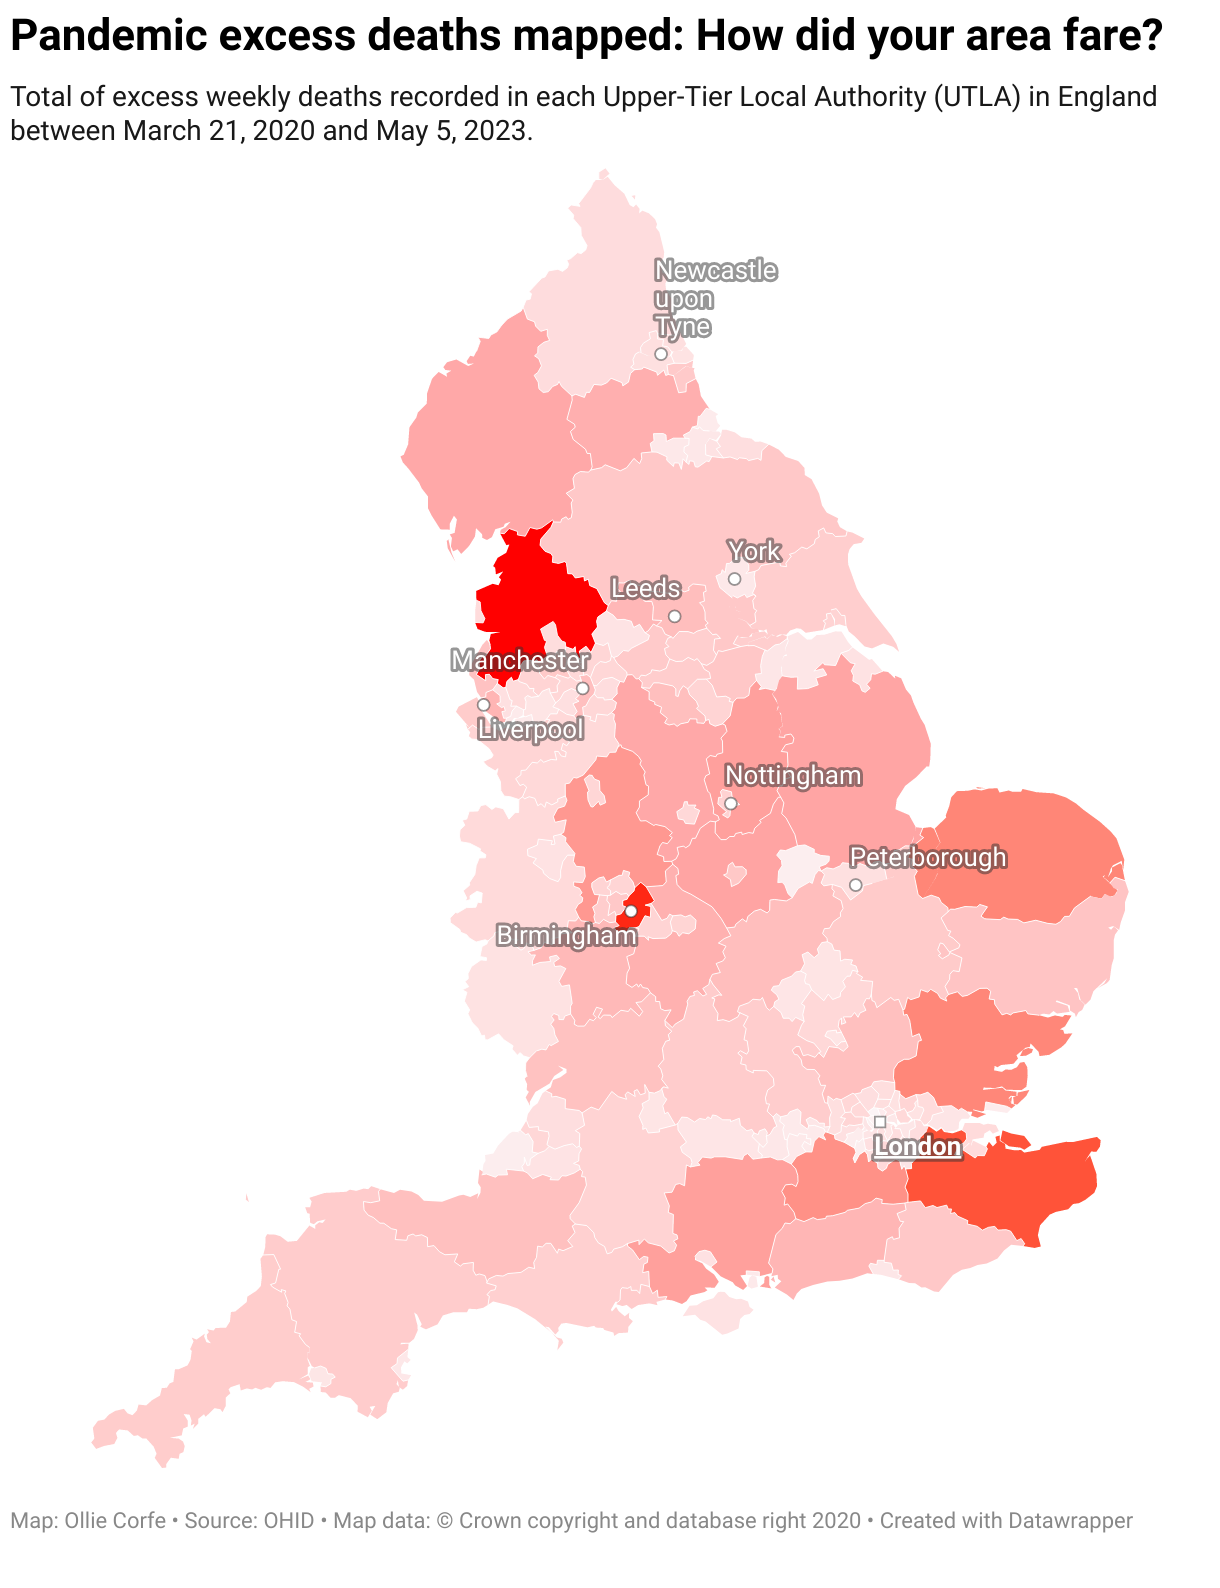 Map of excess deaths in England over the pandemic.